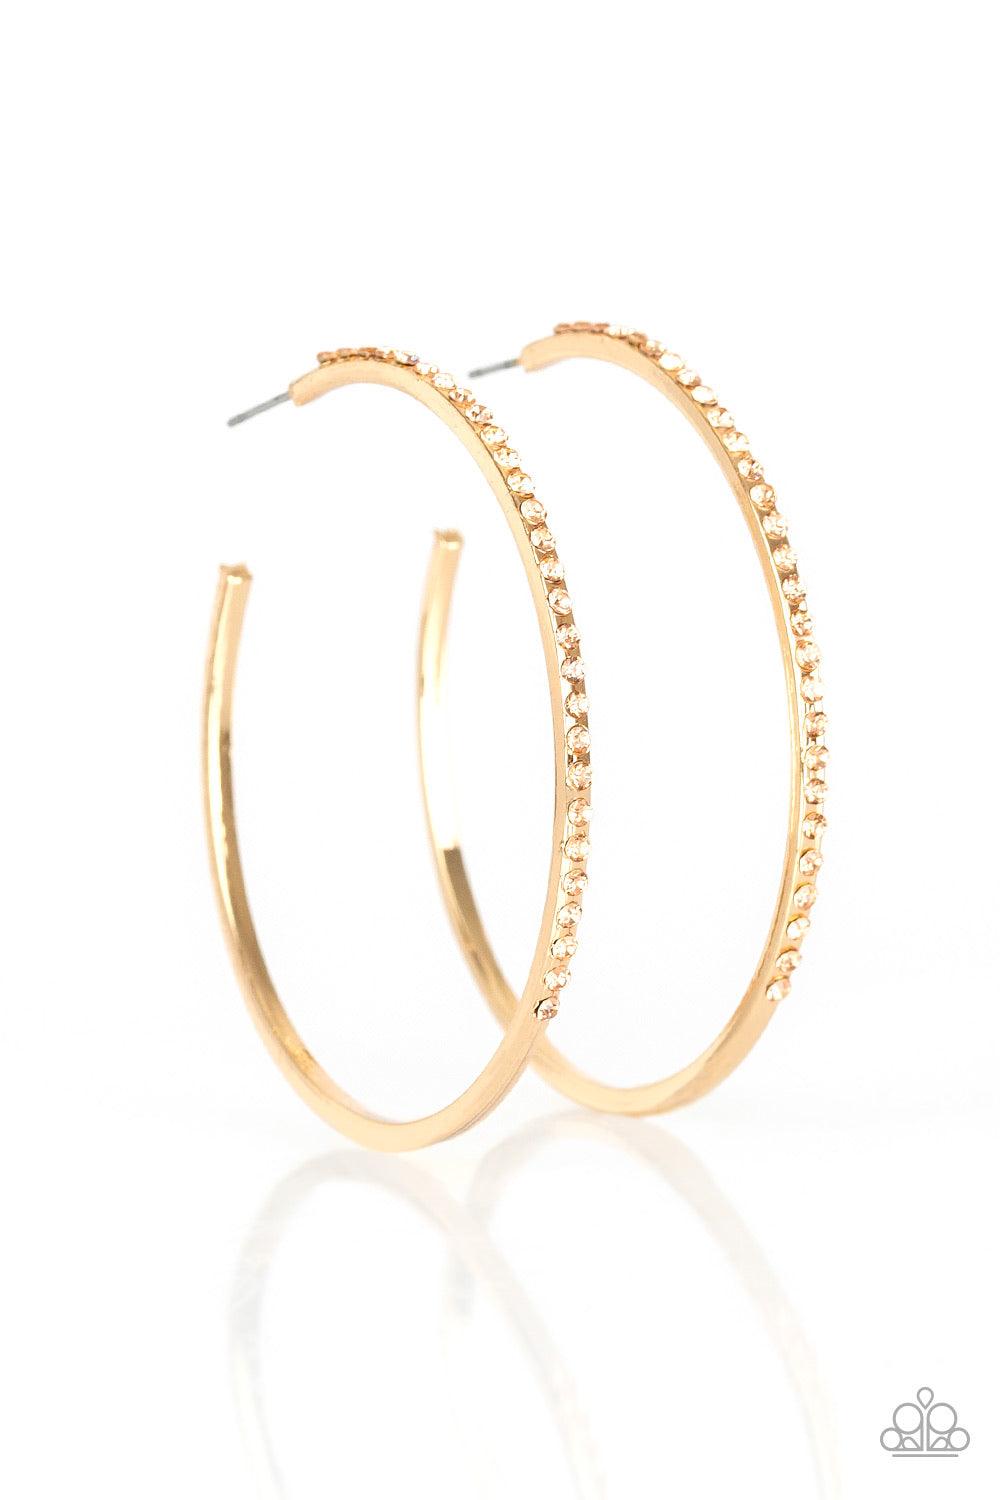 Paparazzi Accessories Trending Twinkle - Gold The front half of a gold hoop is encrusted in peach rhinestones for a radiant look. Earring attaches to a standard post fitting. Hoop measures 2 1/4" in diameter. Jewelry